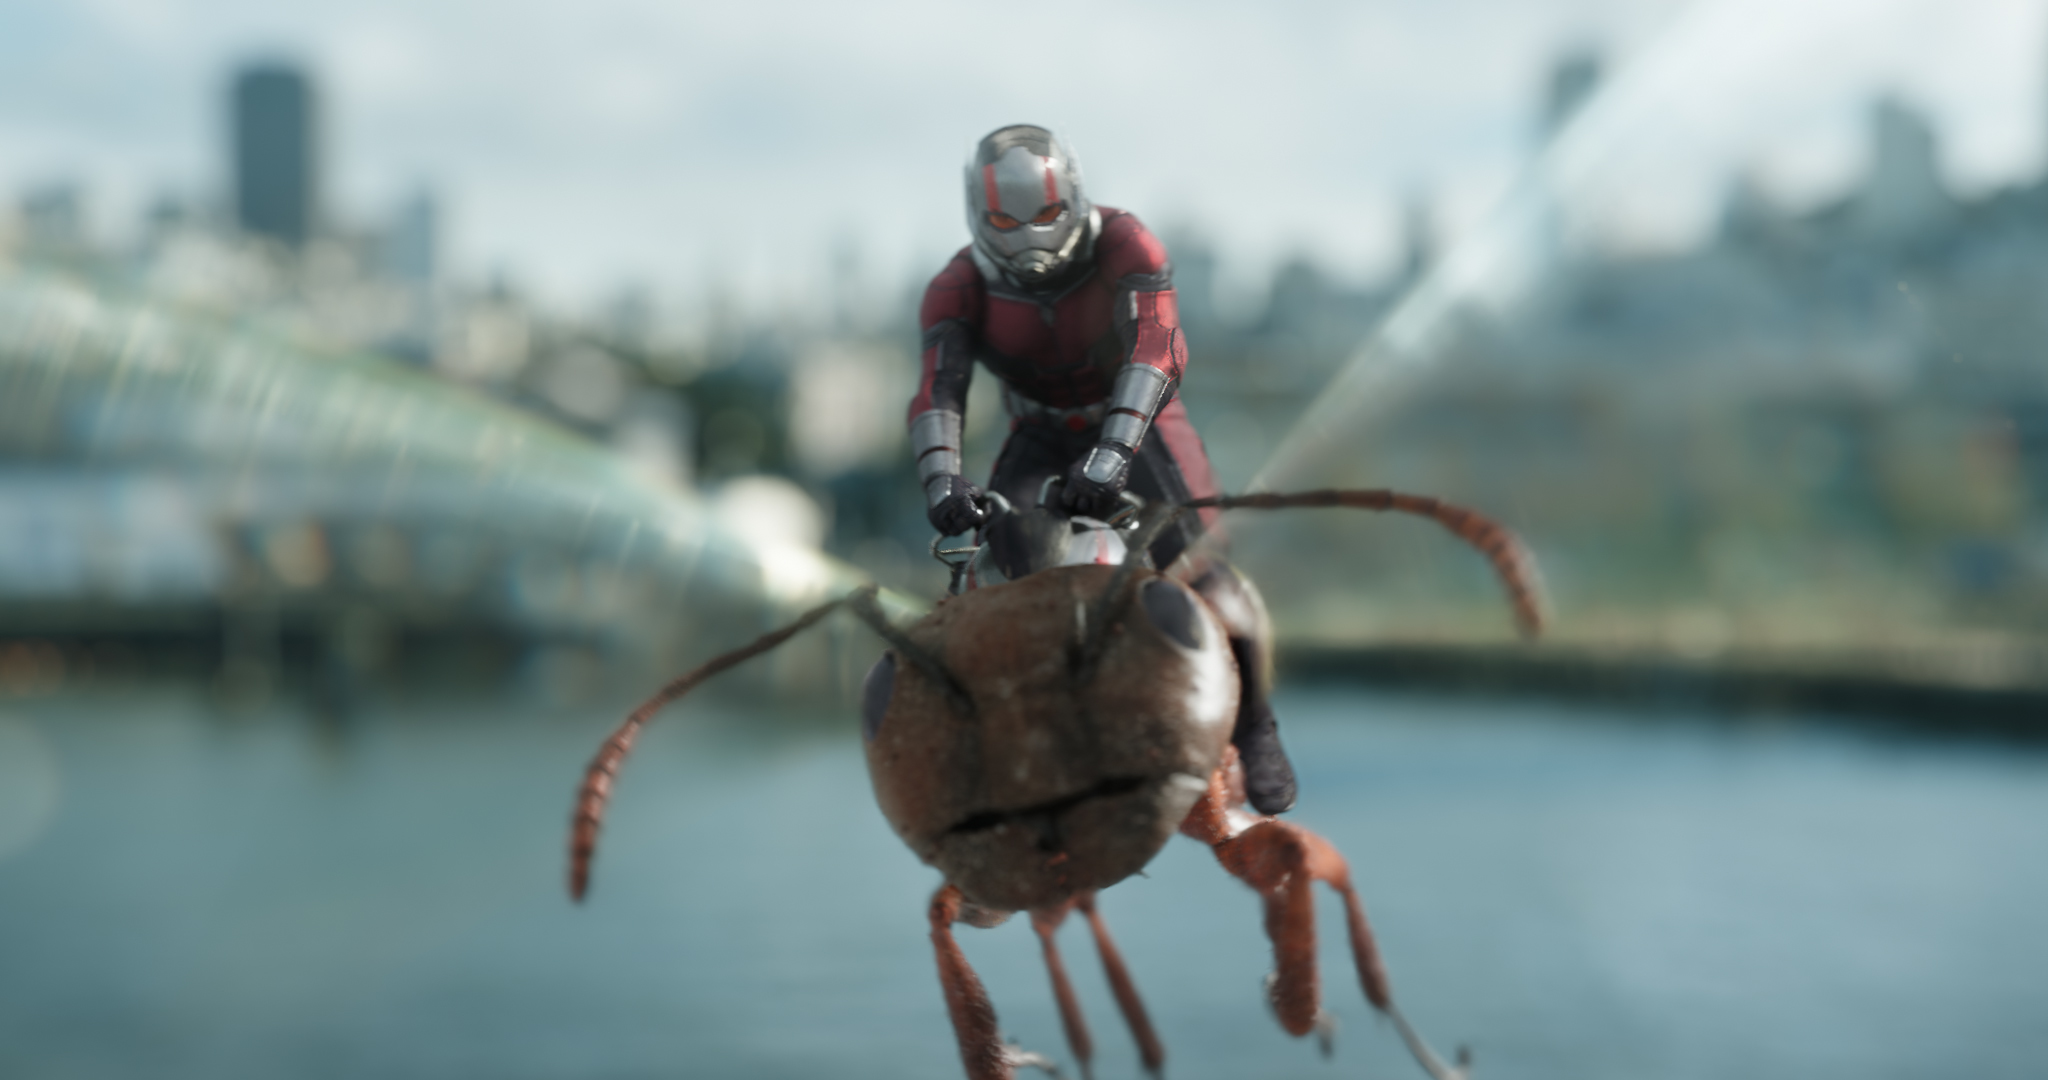 Ant Man Riding Ant In Ant Man And The Wasp Wallpaper Hd Movies 4k Wallpapers Images Photos